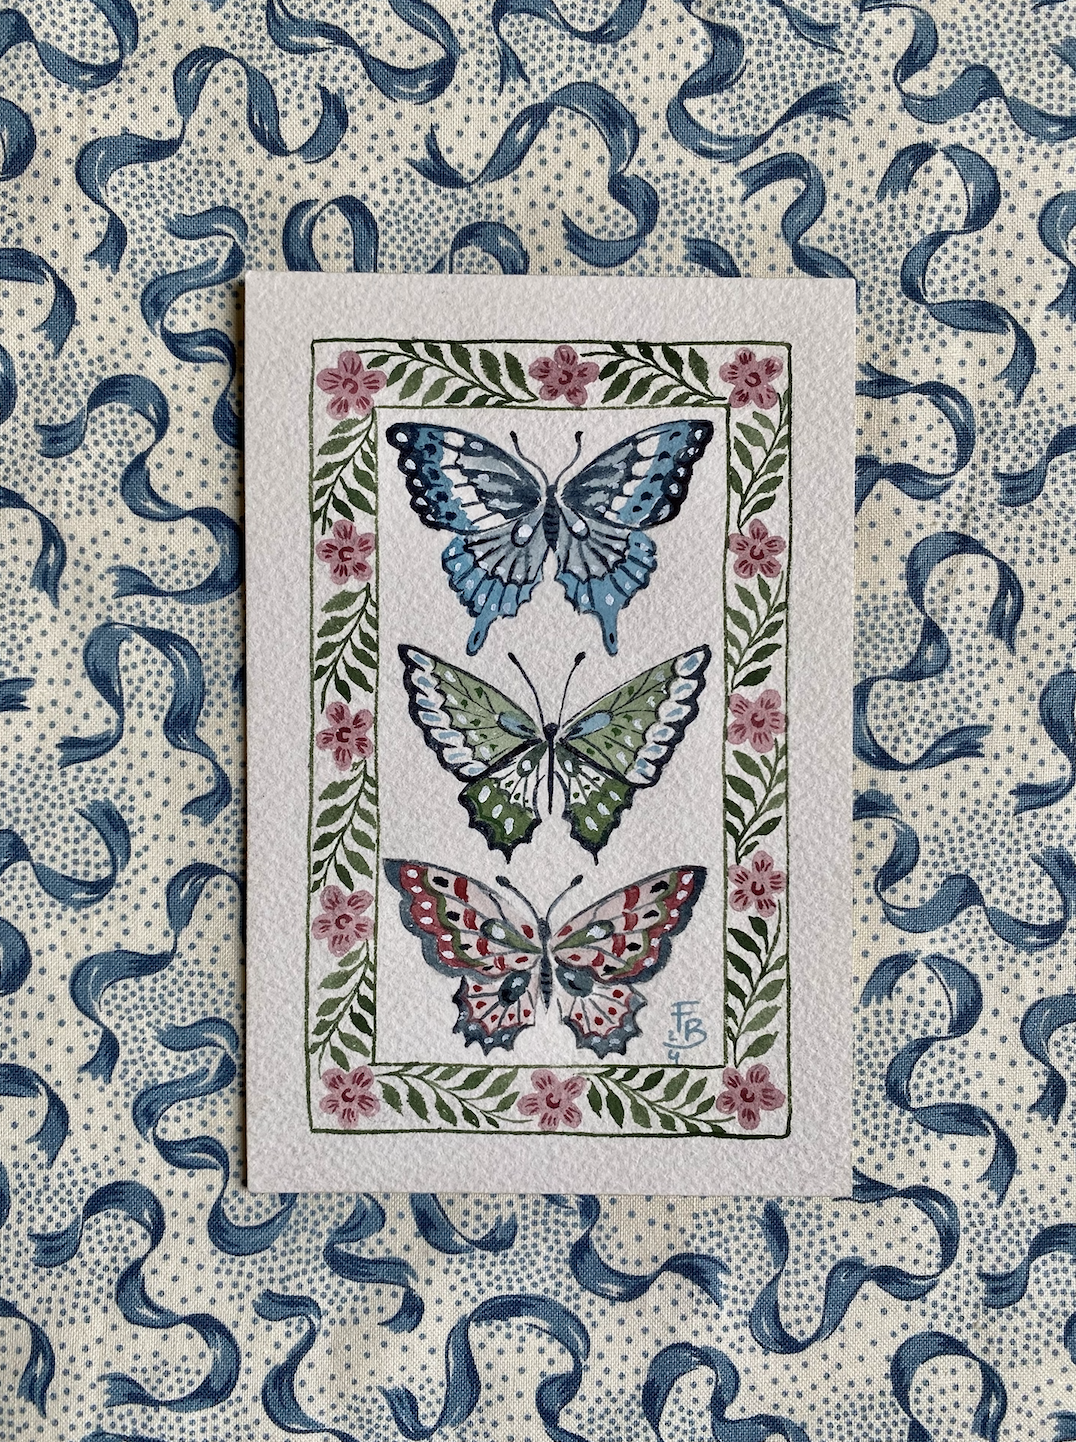 Miniature Watercolour painting - Butterfly trio